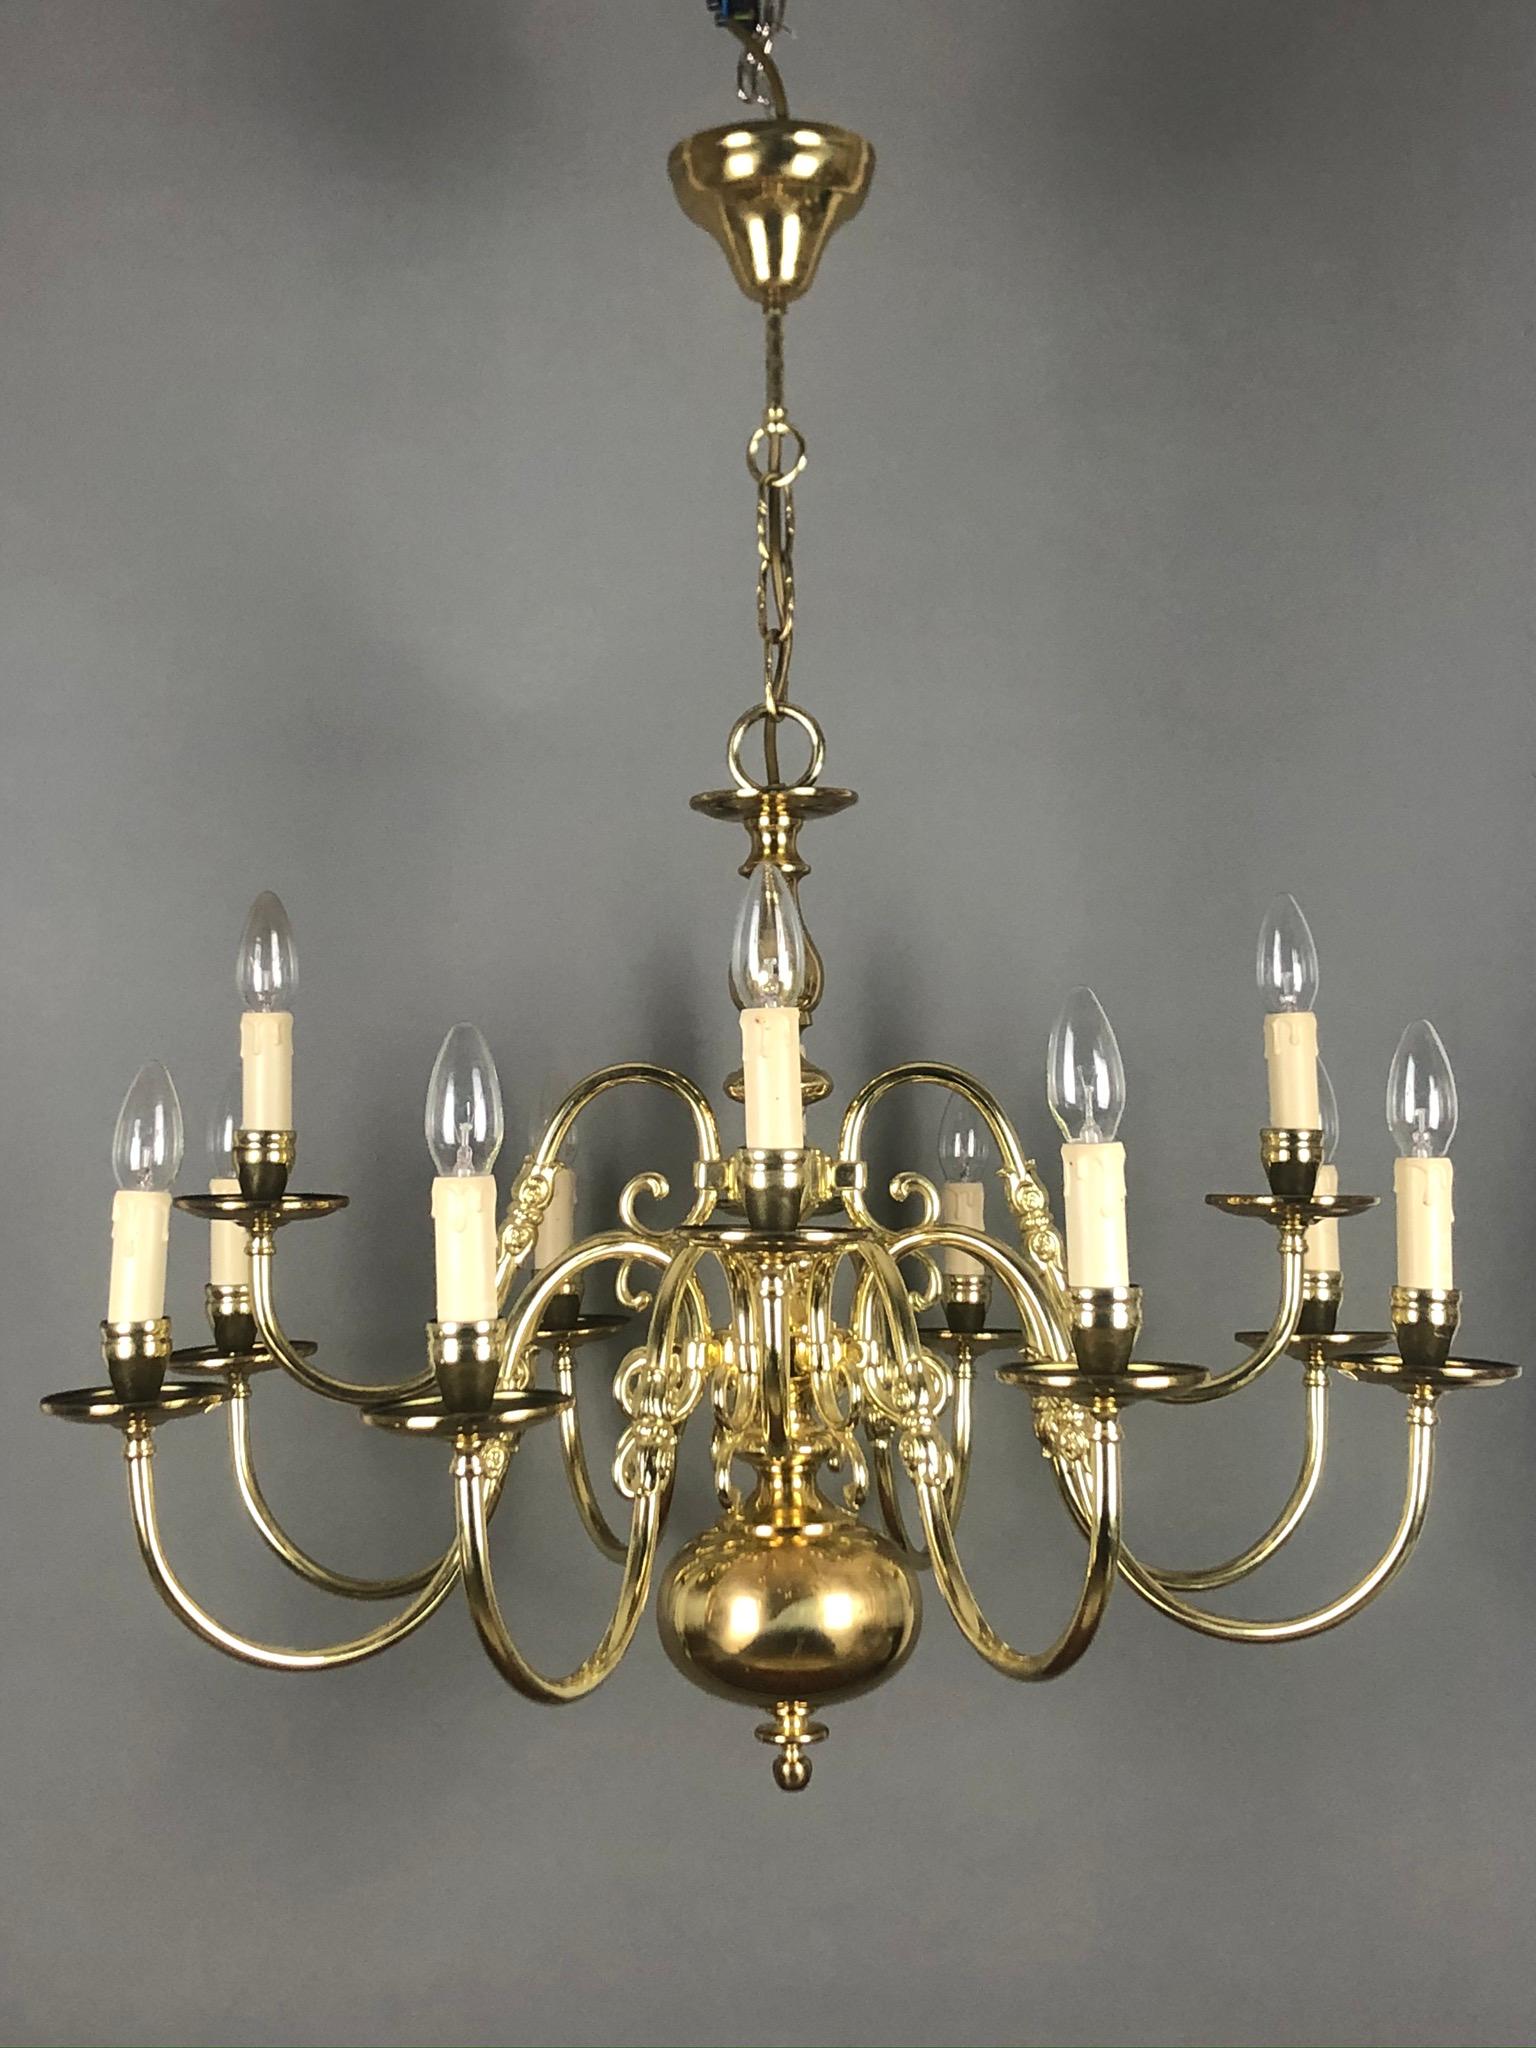 Stunning twelve-light polished brass chandelier in the style of Baroque.

Socket: 12 x e 14 for standard screw bulbs.
 